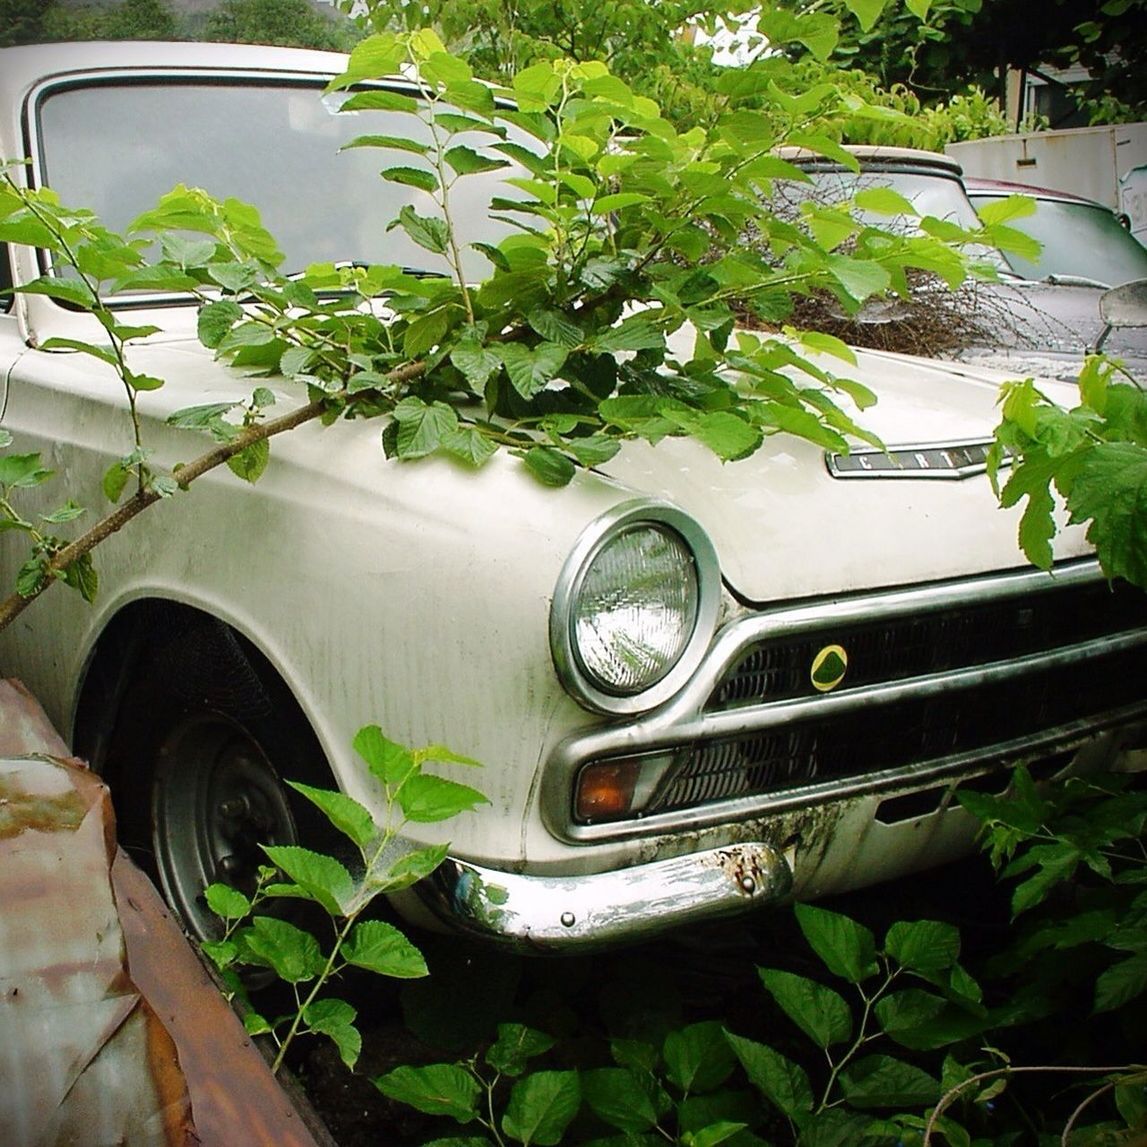 plant, green color, growth, car, old, leaf, mode of transport, land vehicle, front or back yard, transportation, potted plant, abandoned, day, high angle view, no people, outdoors, built structure, obsolete, building exterior, close-up